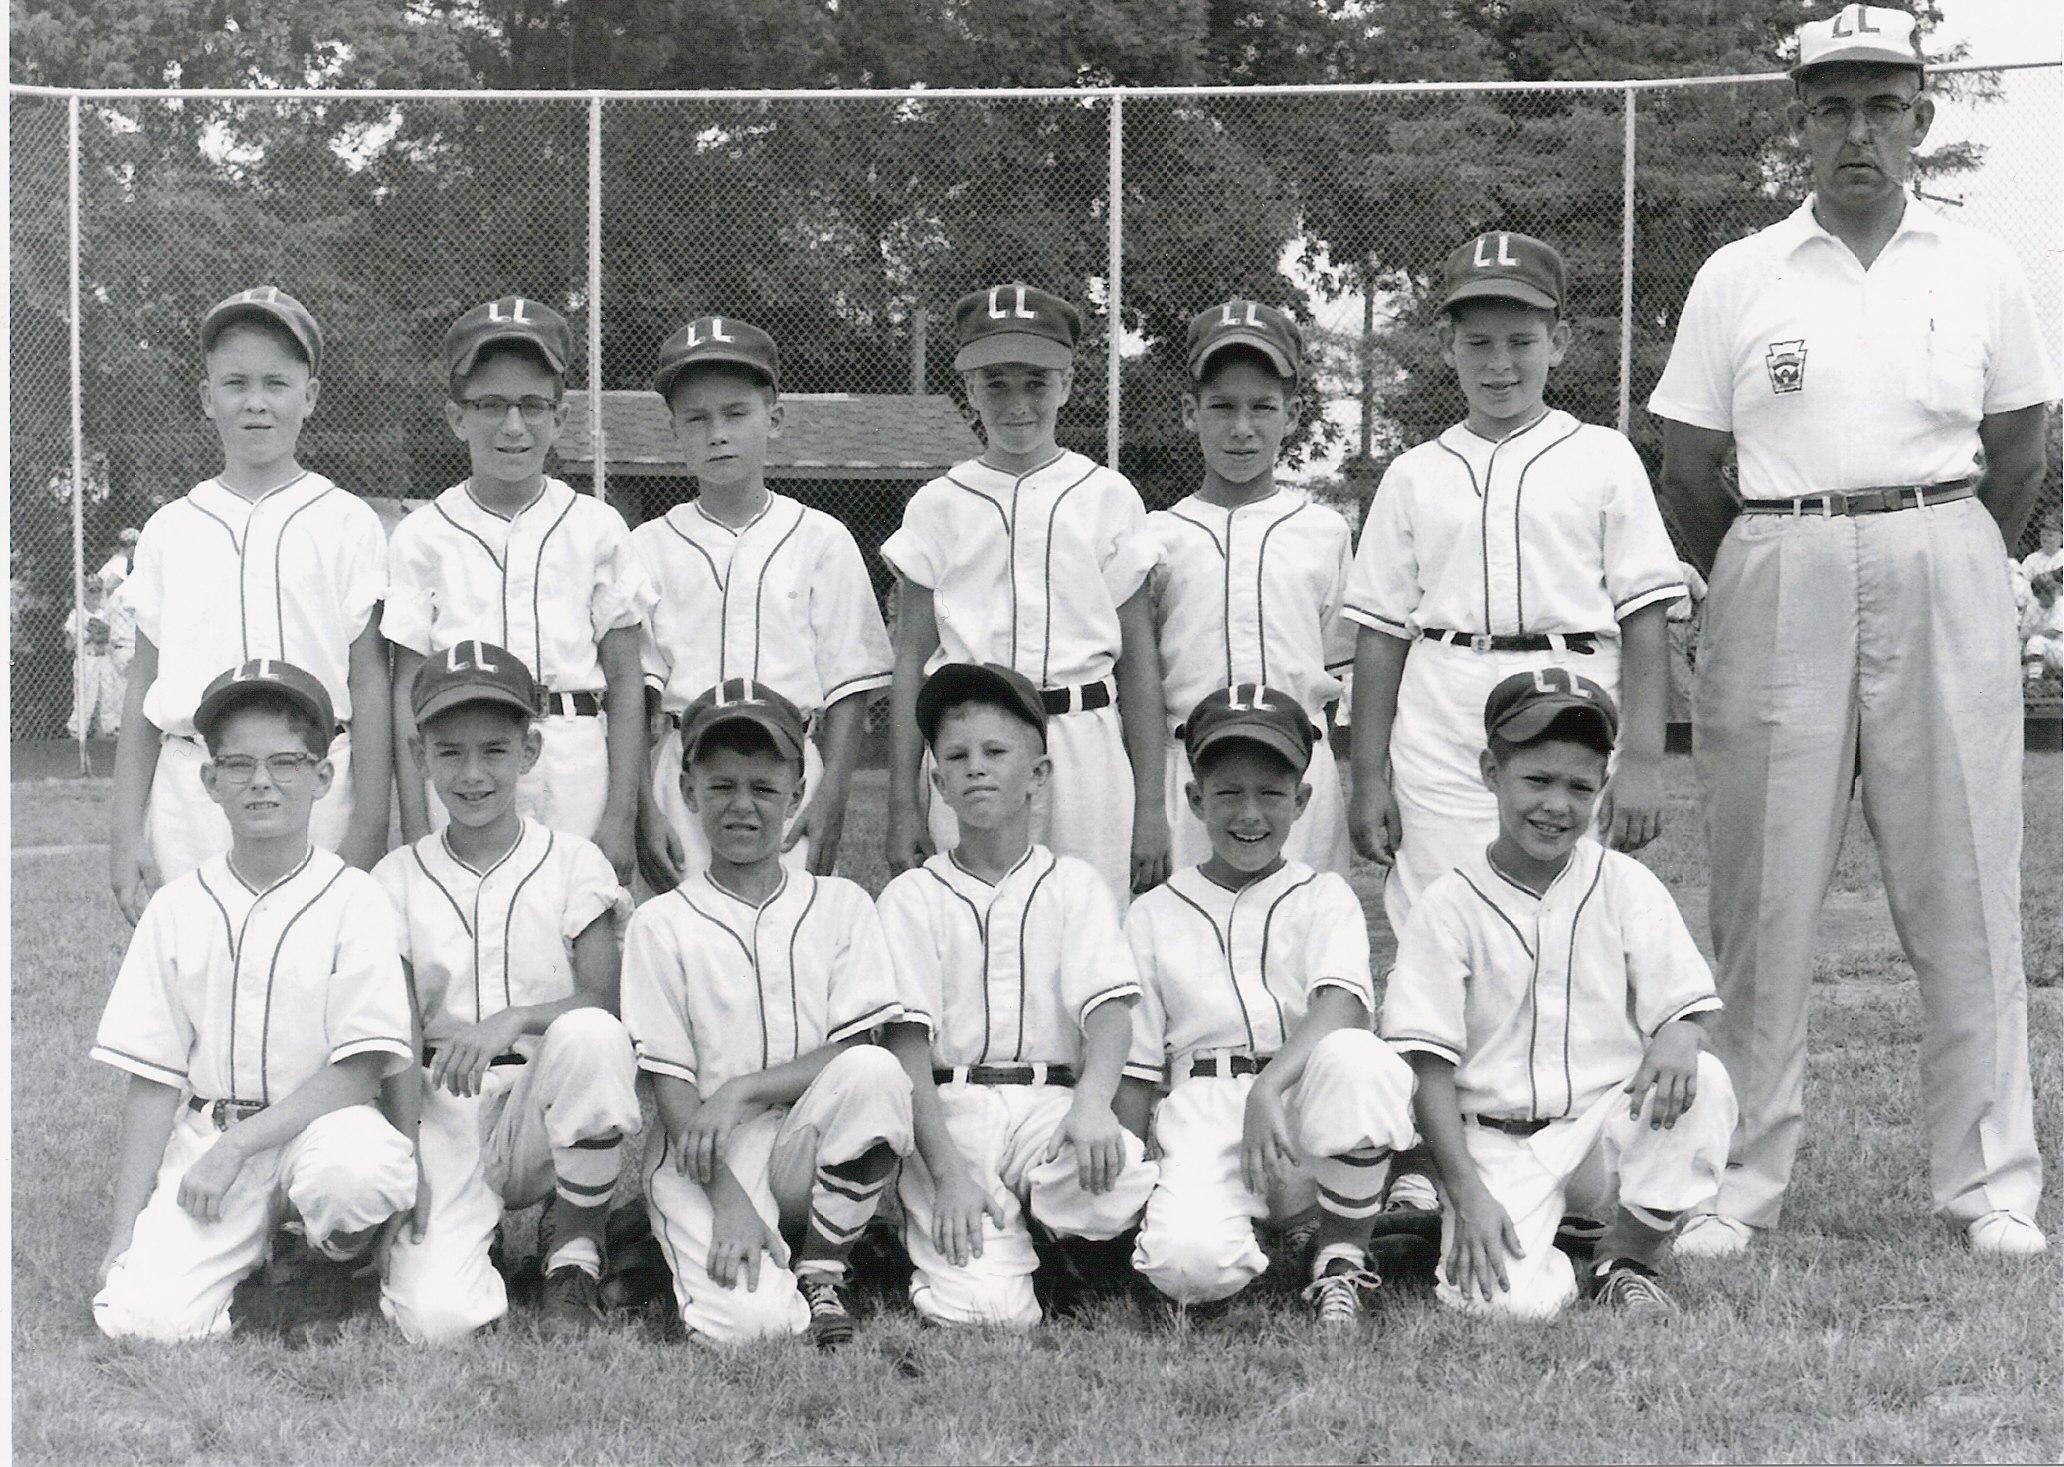 Little League photo submitted by Don Moshos class of '66